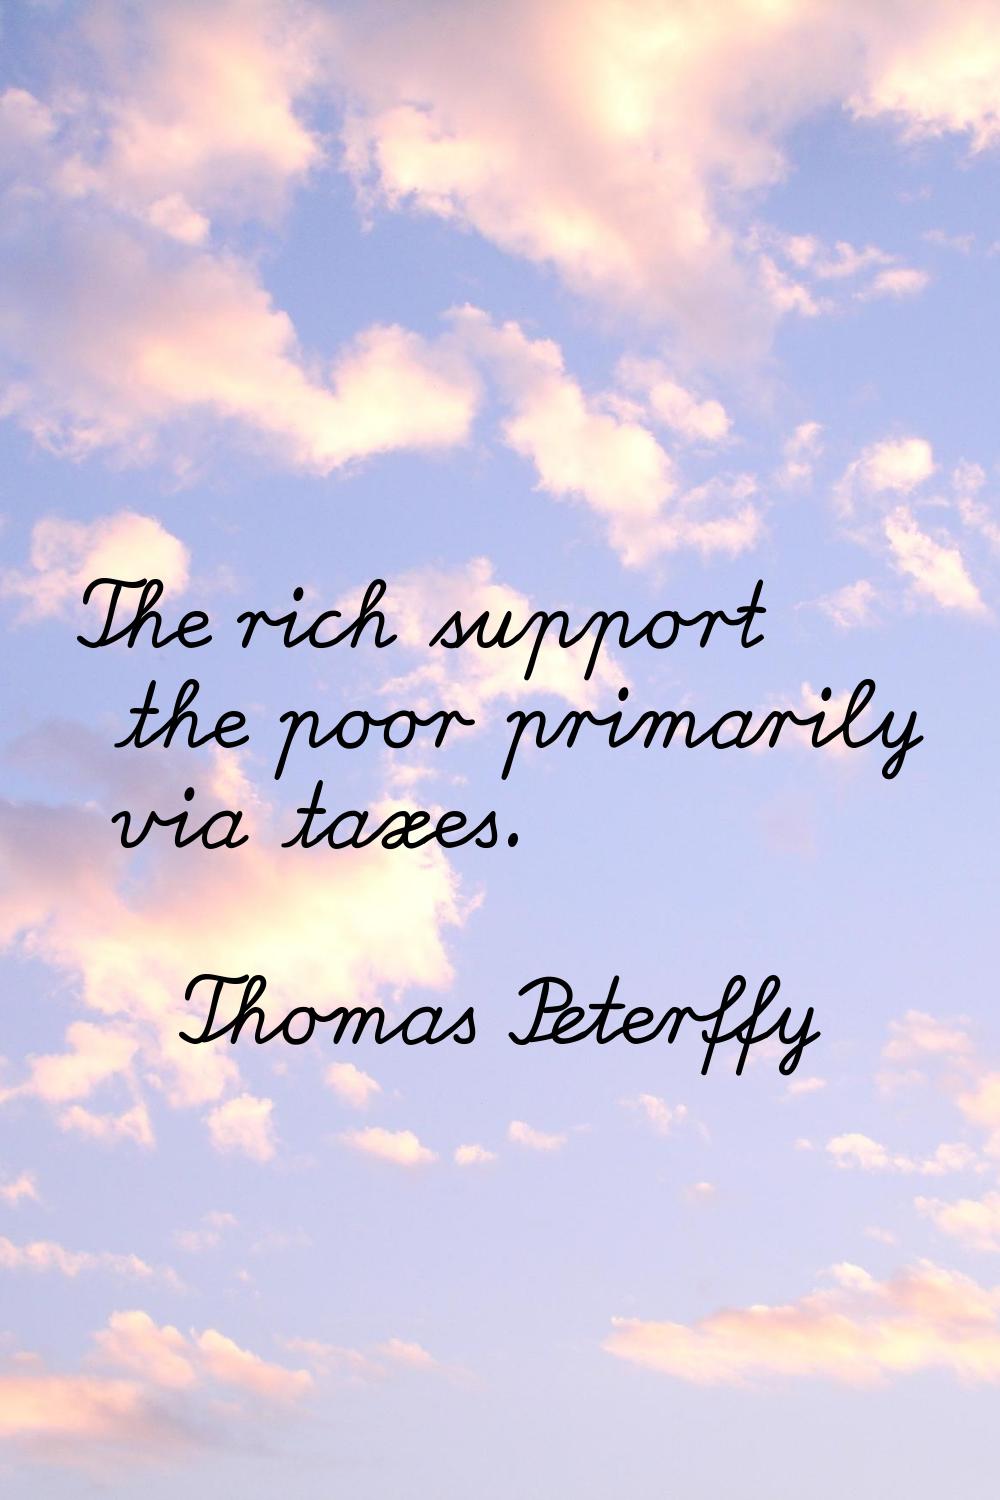 The rich support the poor primarily via taxes.